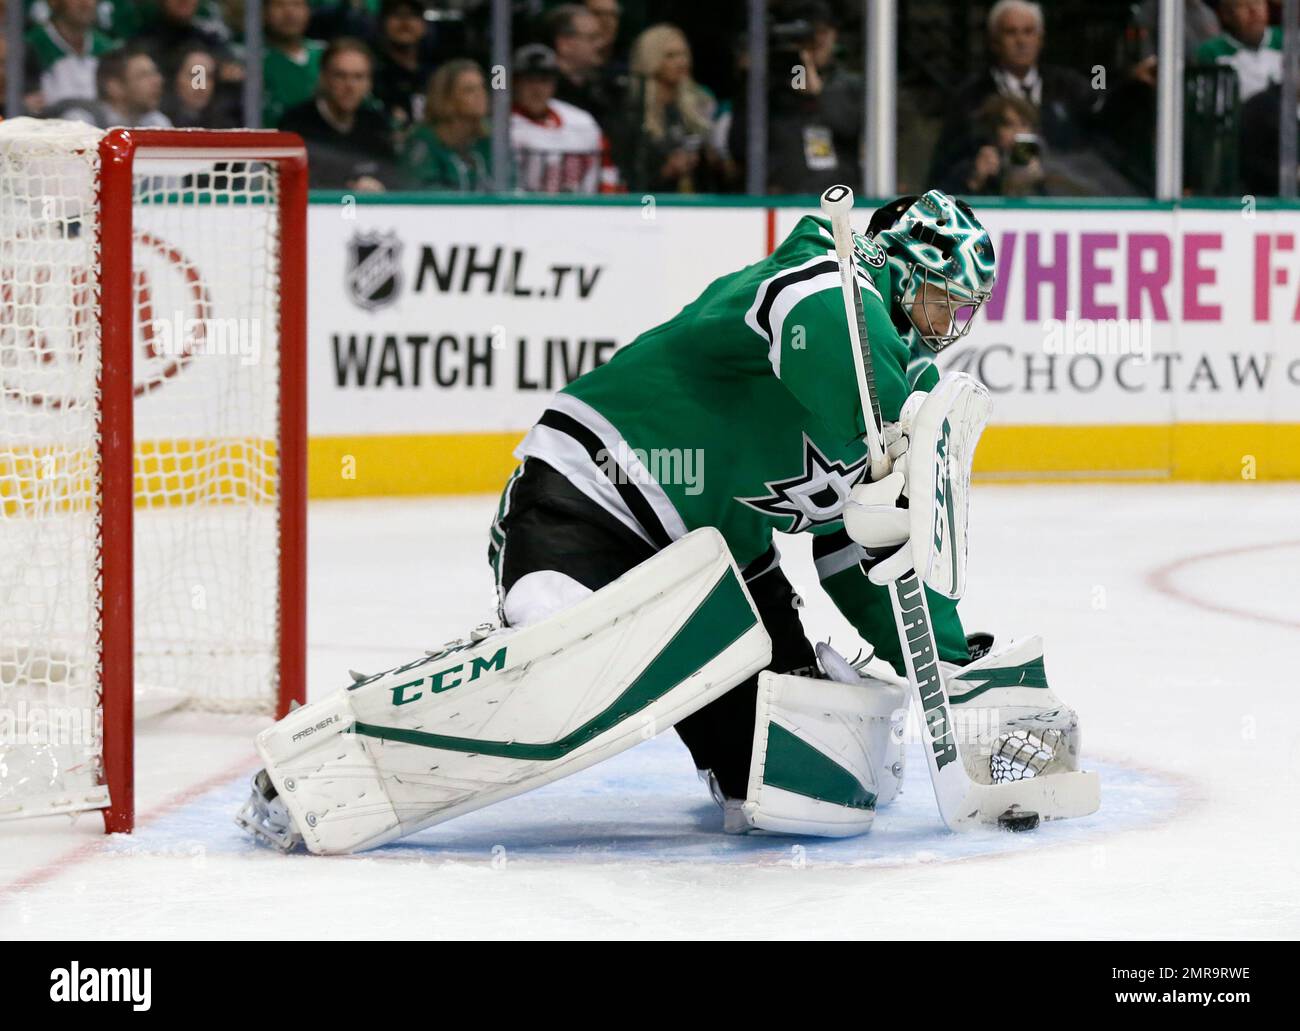 Former Lightning goalie Ben Bishop is on the Stars, but where is he?